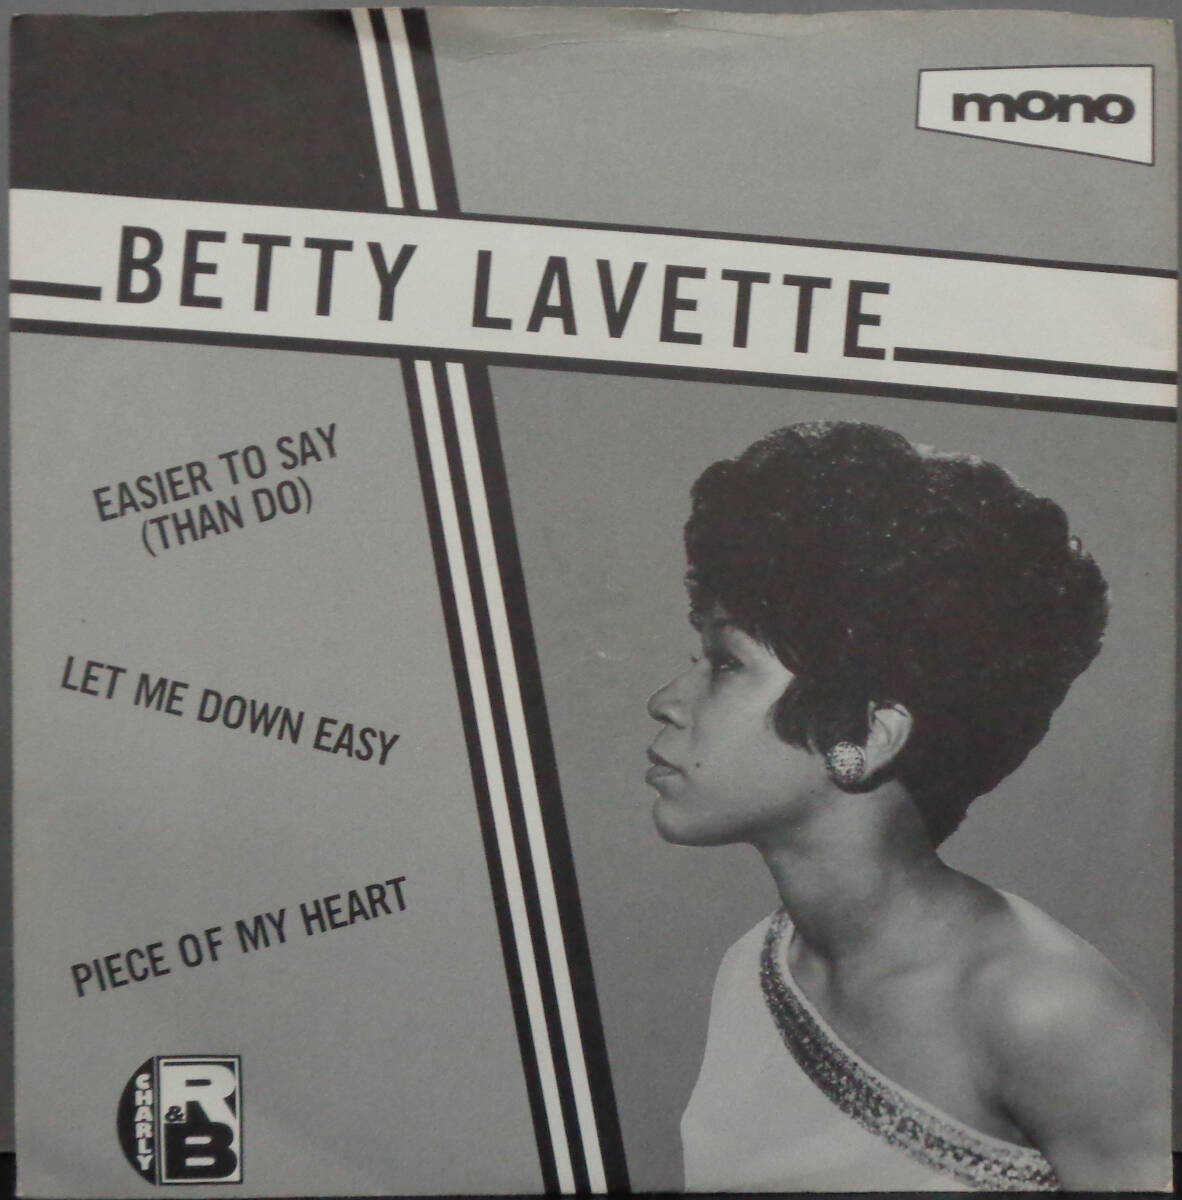 【SOUL 45】BETTY LAVETTE - EASIER TO SAY / LET ME DOWN EASY / PIECE OF MY HEART (s240511050) _画像1